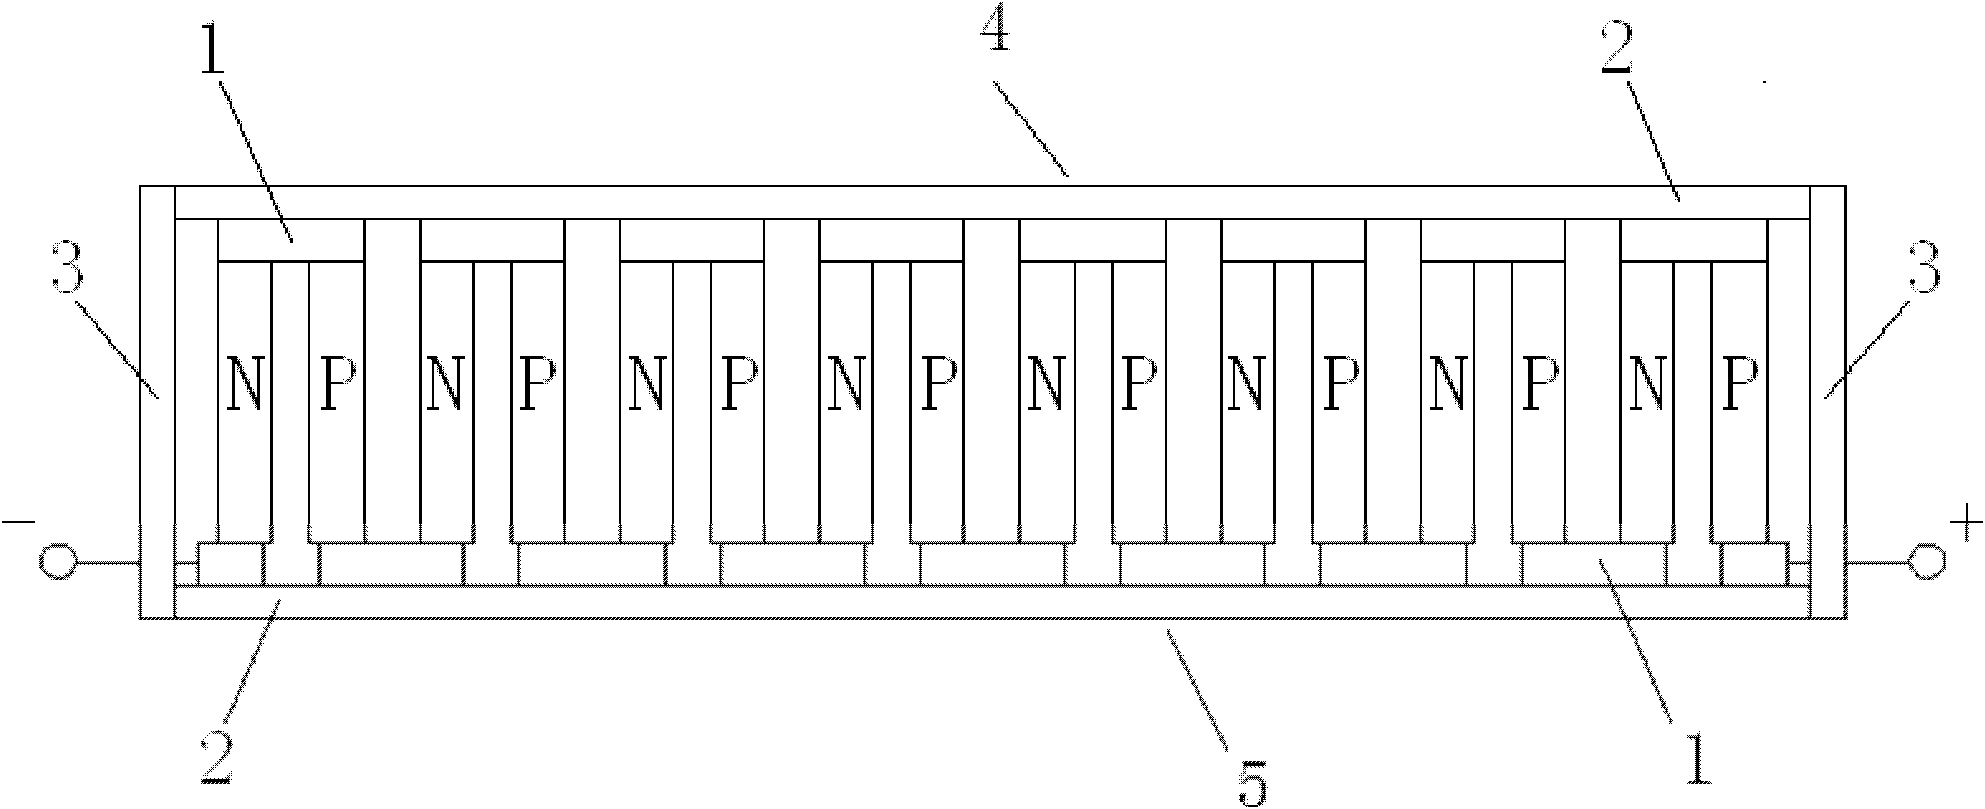 Generation system using temperature difference between city asphalt pavement and underground water source pipeline